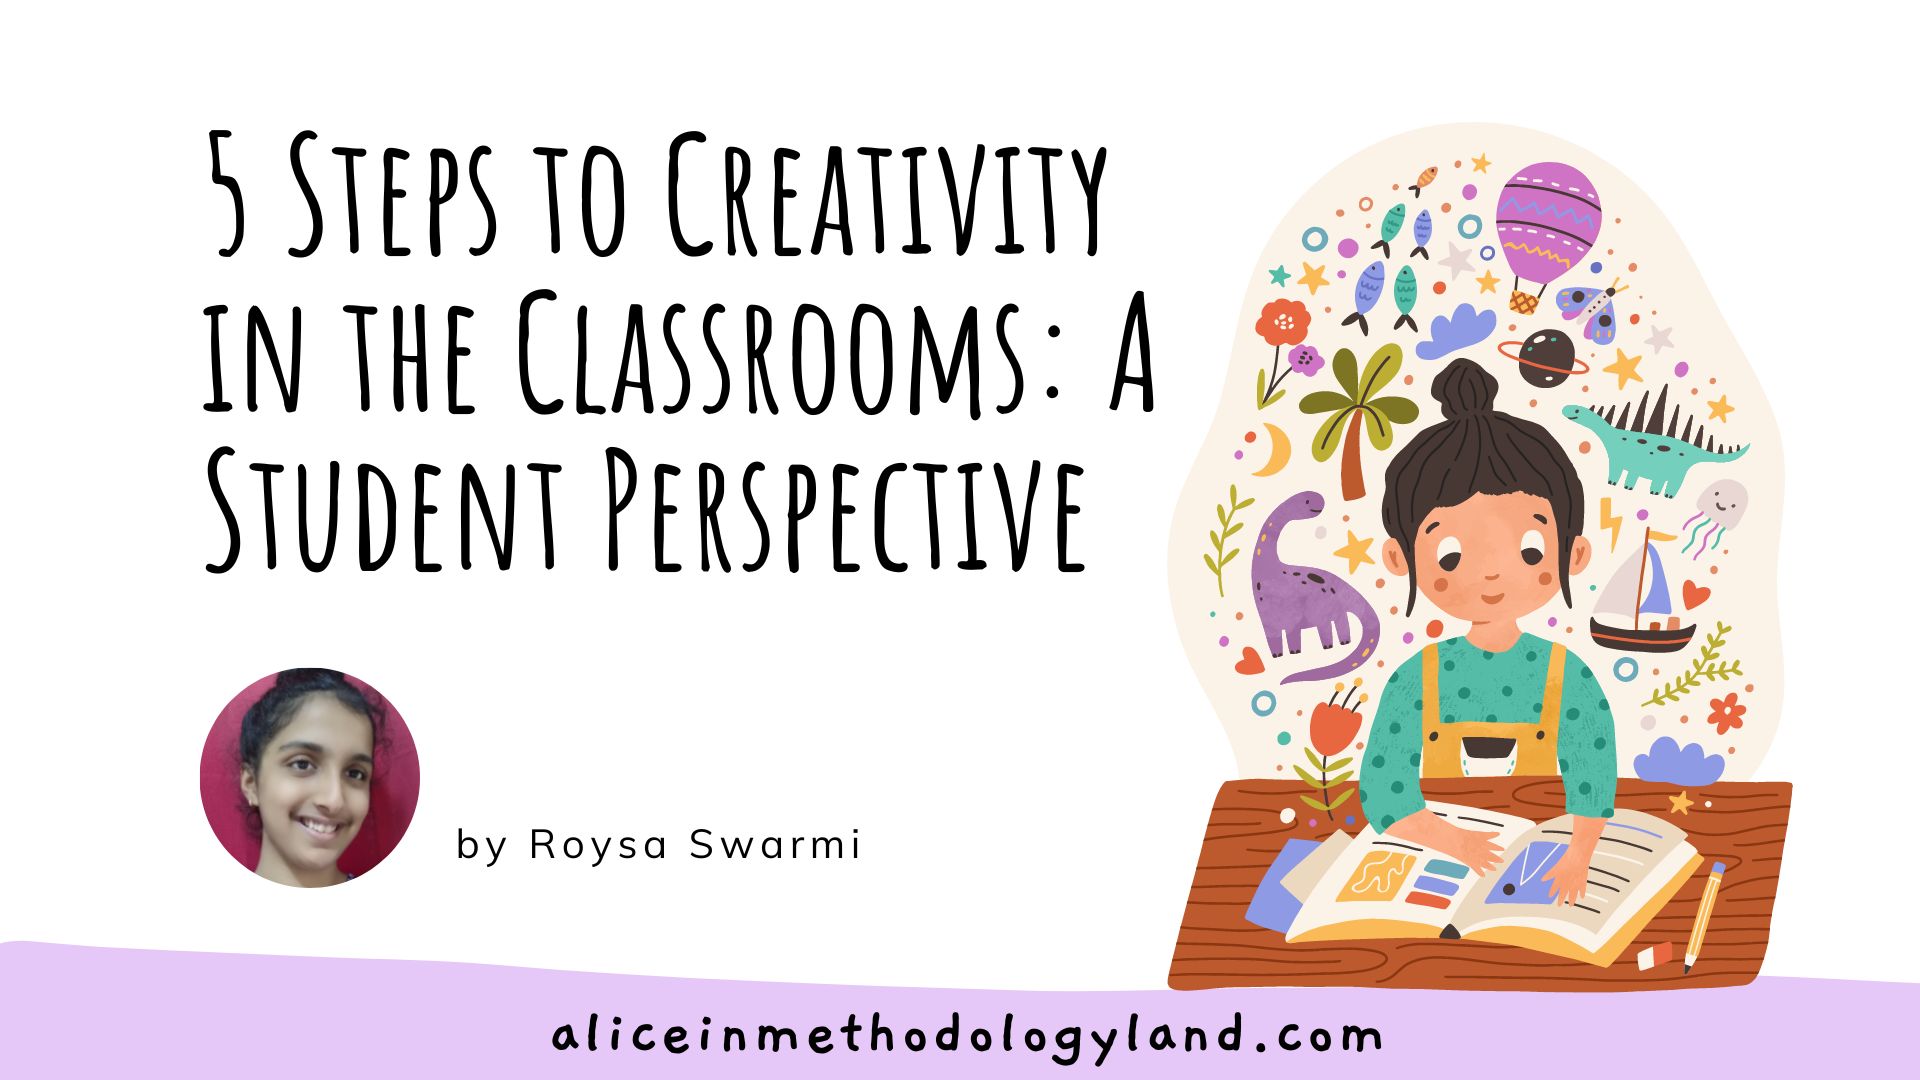 5 Steps to Creativity in the Classrooms: A Student Perspective by Roysa Swarmi